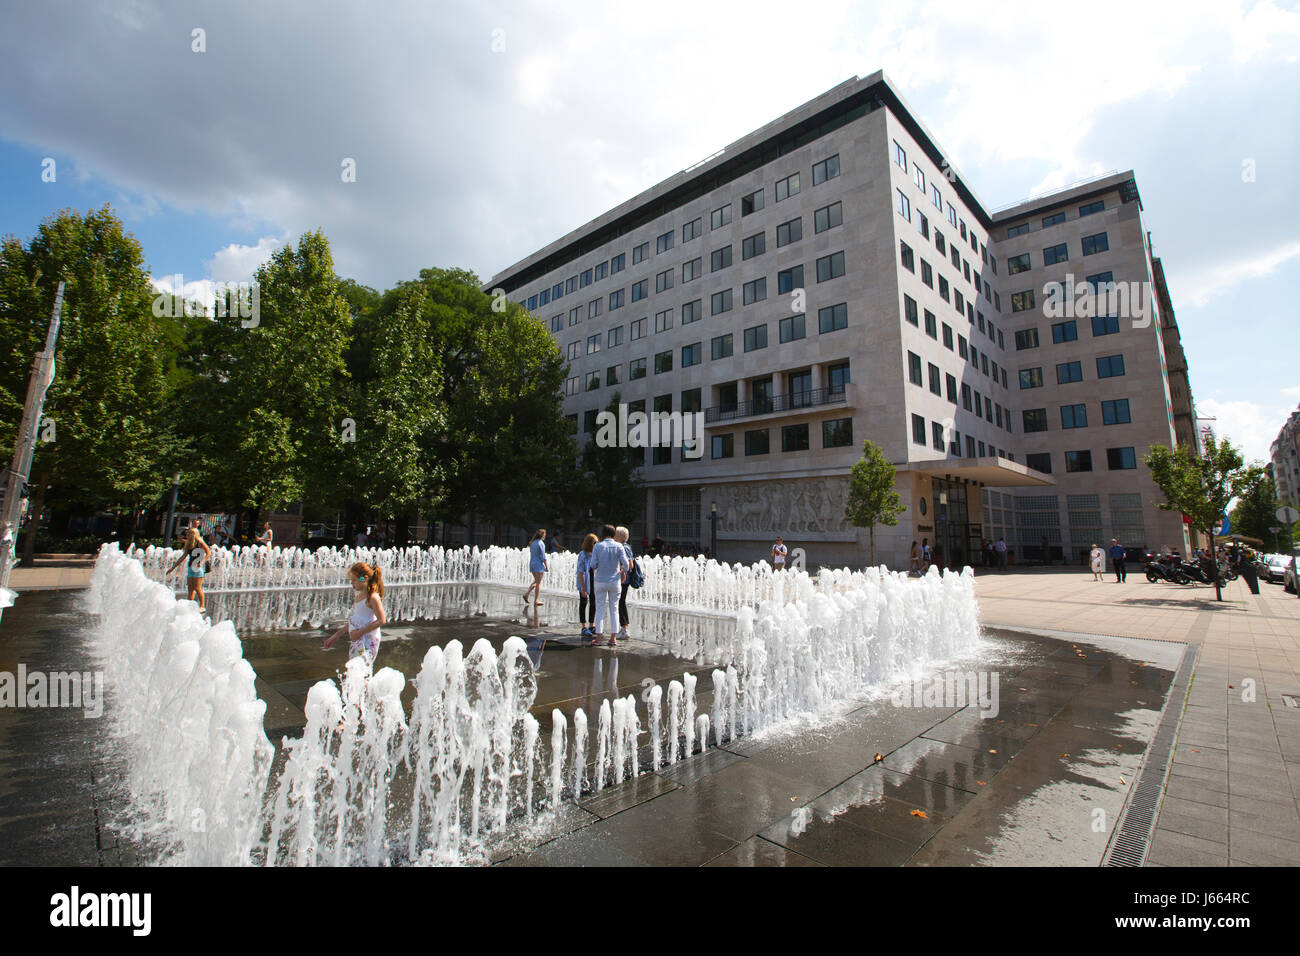 Interactive fountain on Szabadság Square, Monument to the victims of the German occupation built in 2014 on Szabadsag square, Budapest, Hungary Stock Photo